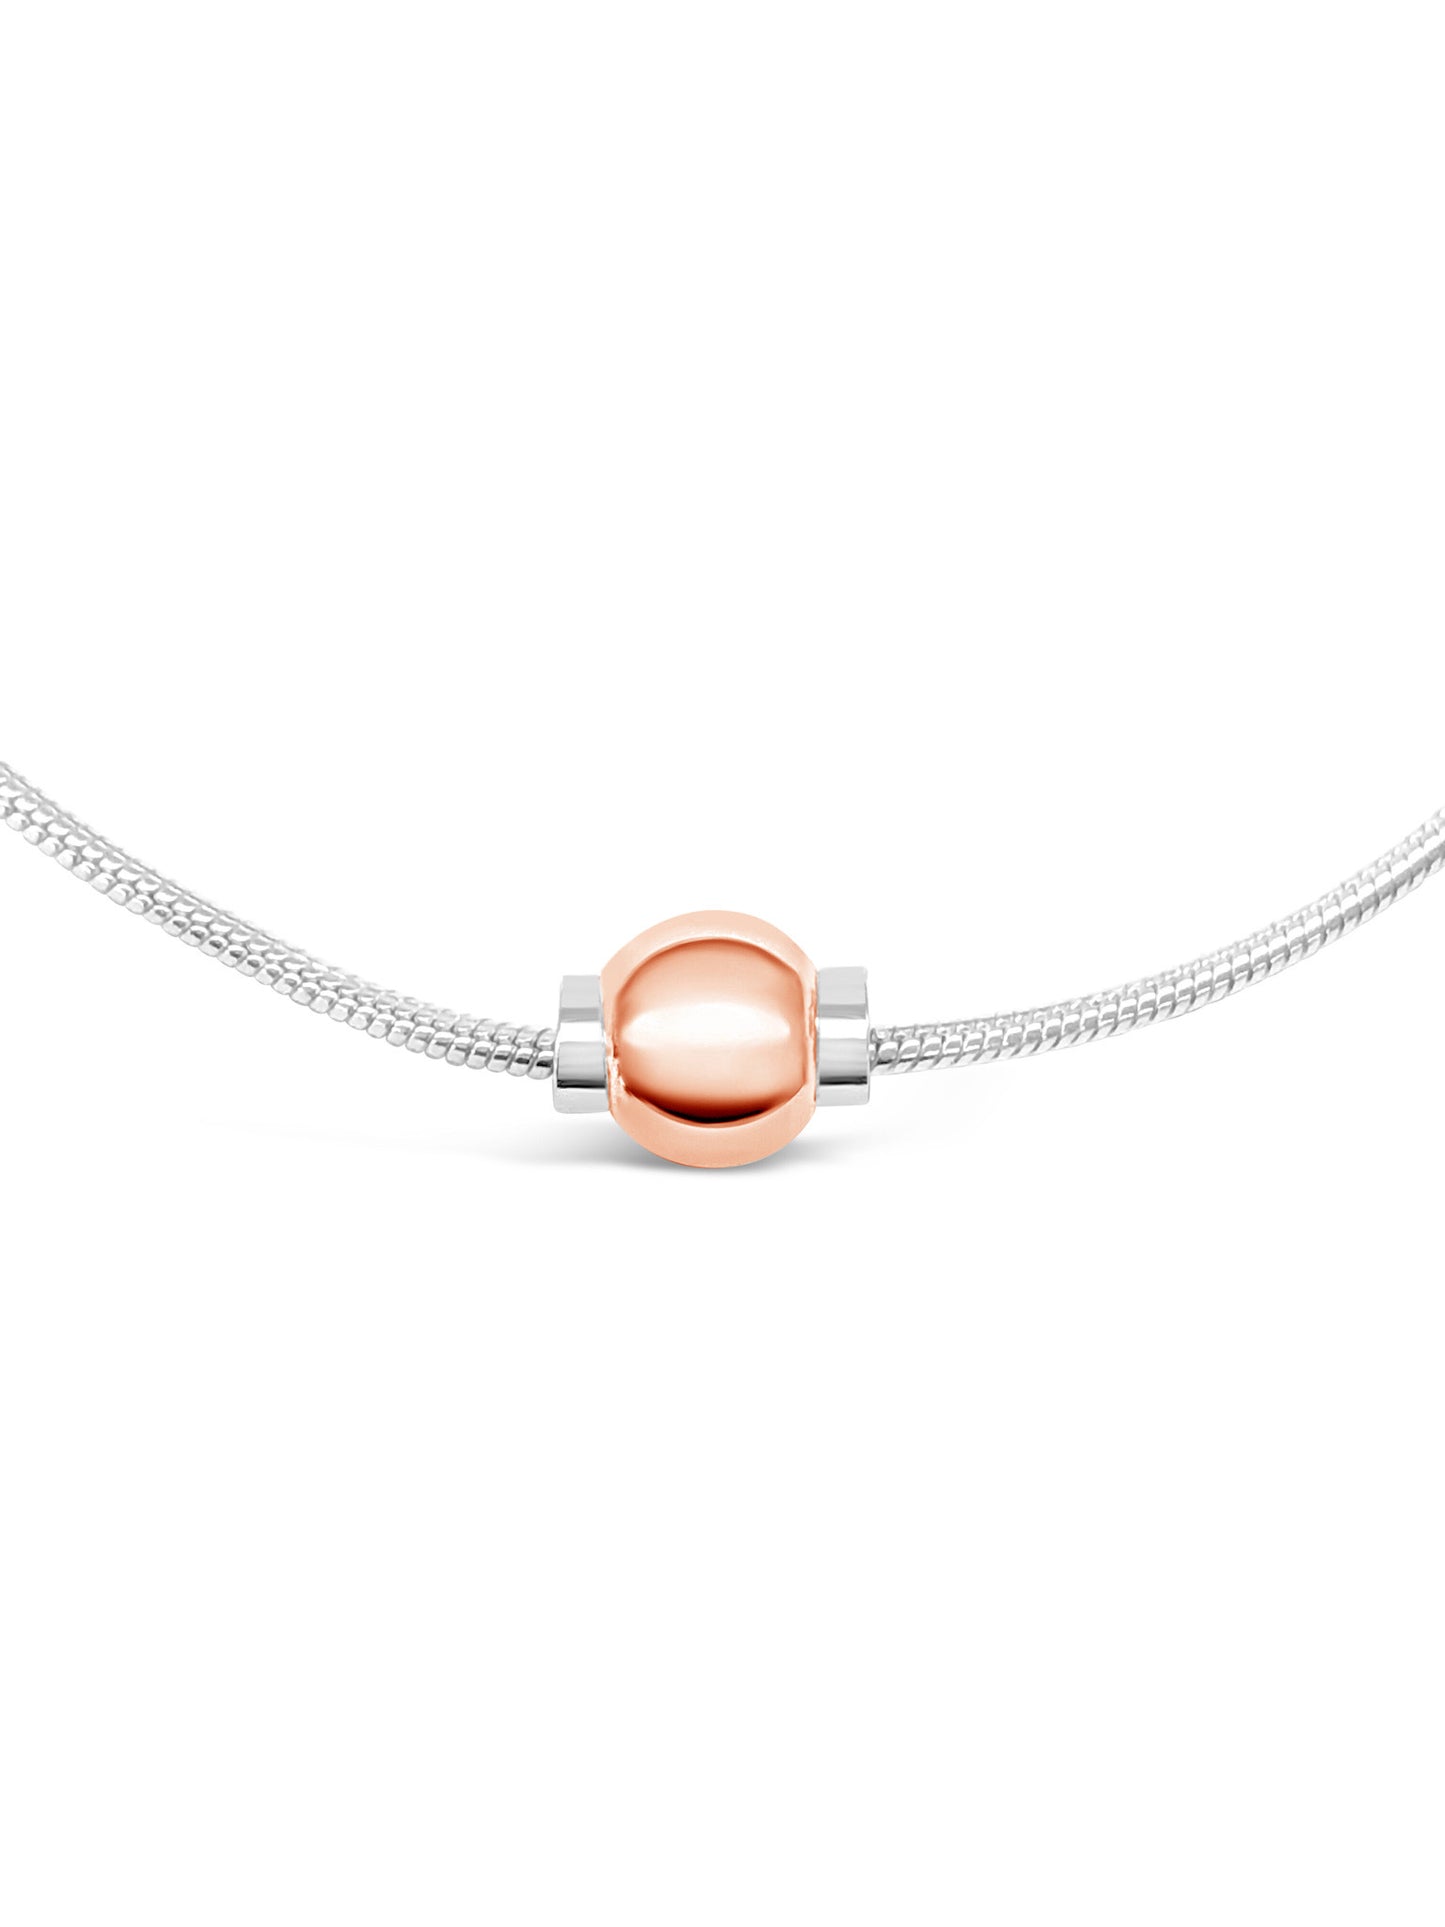 made on Cape Cod. Beachball Necklace™ made of 14k rose gold and 925 sterling silver chain